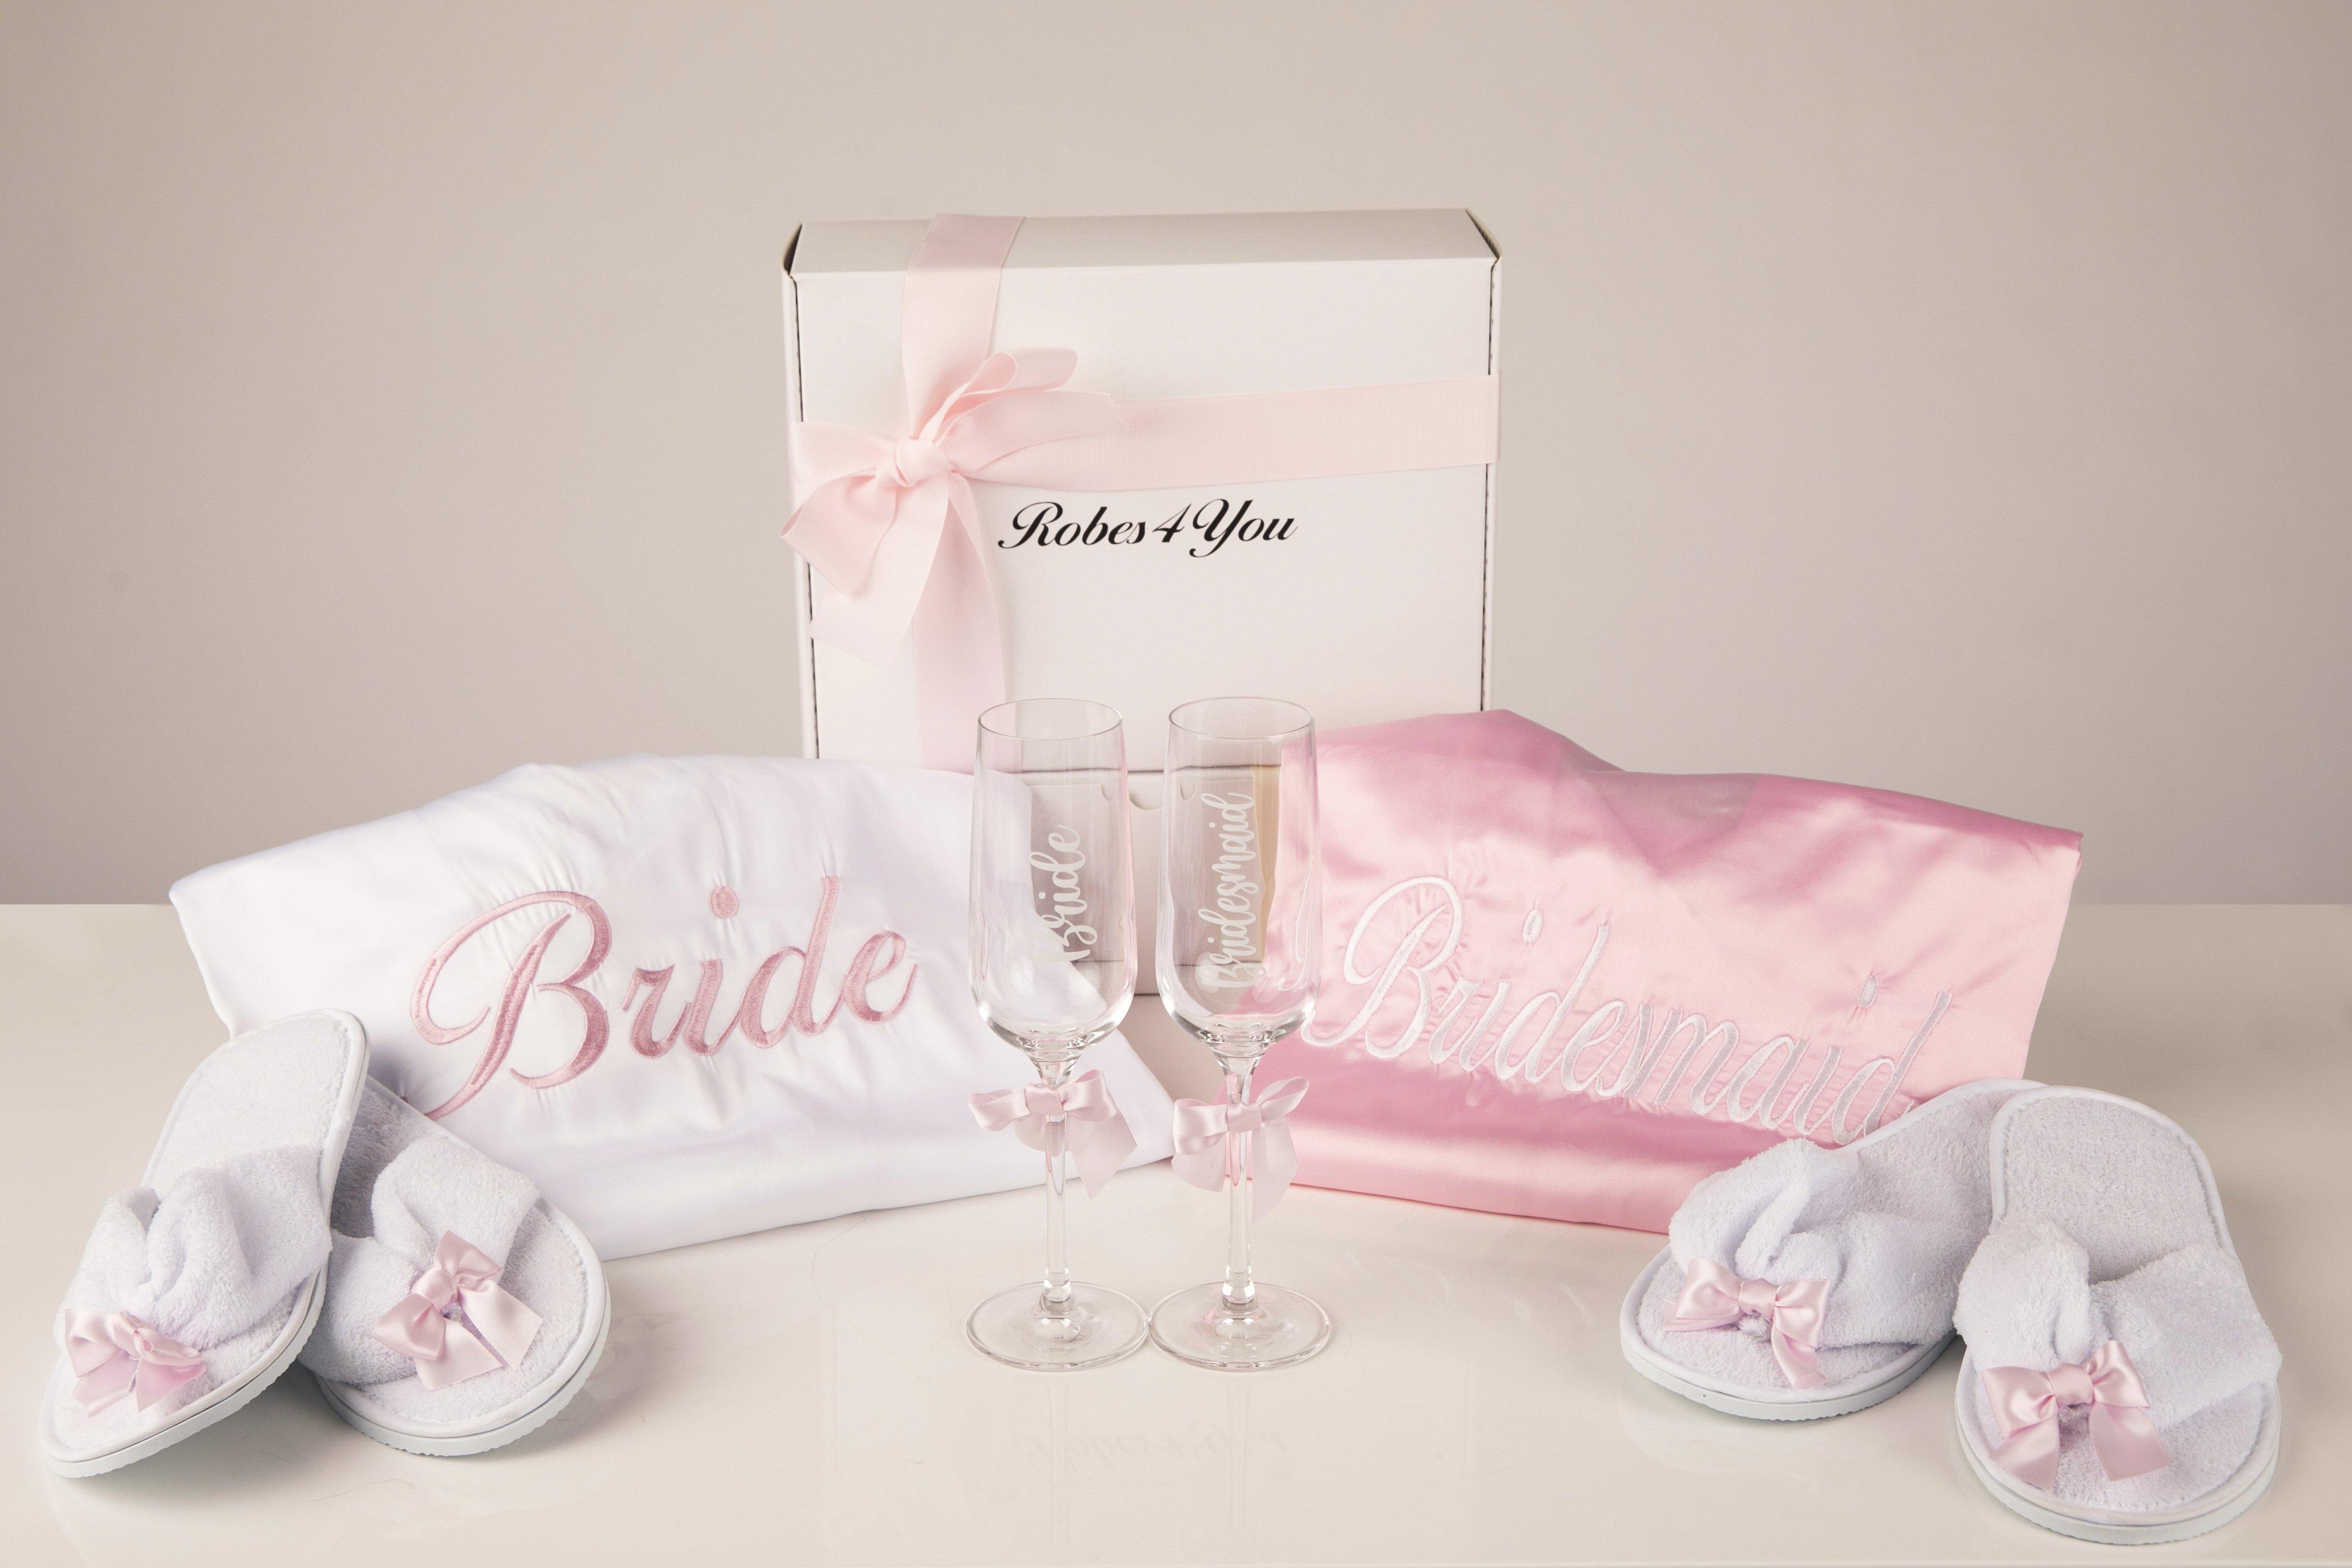 Baby pink satin personalised robe - Robes 4 You